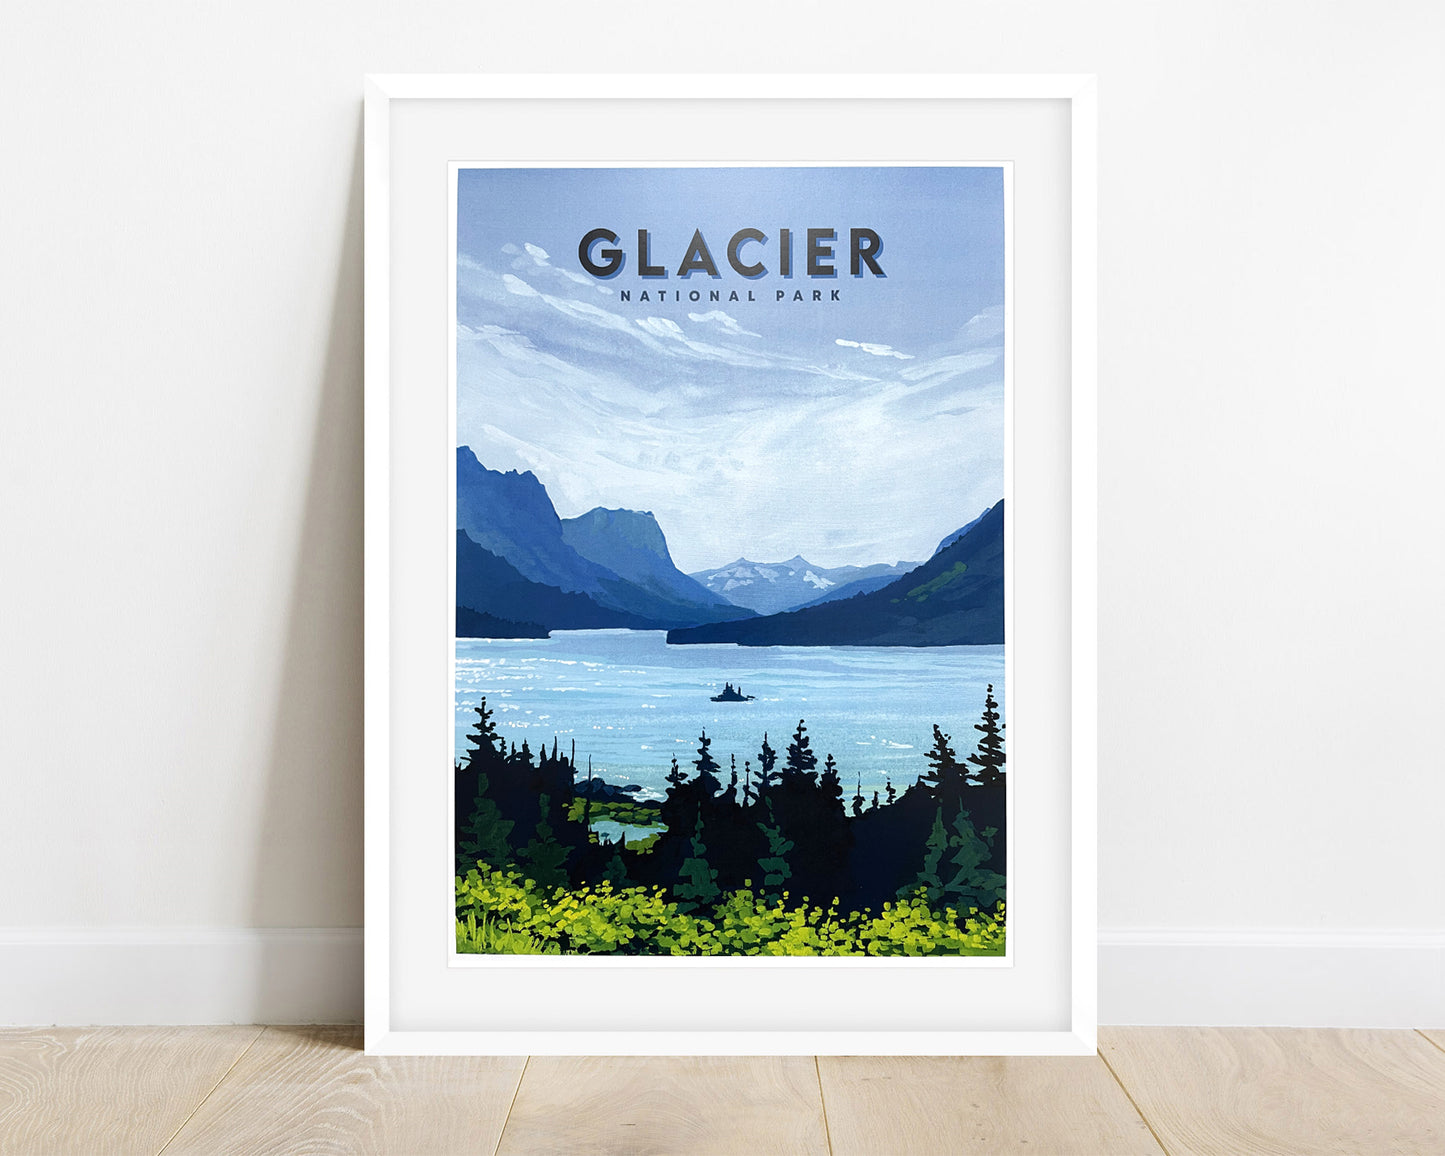 Image of a framed travel poster for Montana’s Glacier National Park. Background image of poster is a painting of Wild Goose Island and St. Mary Lake.